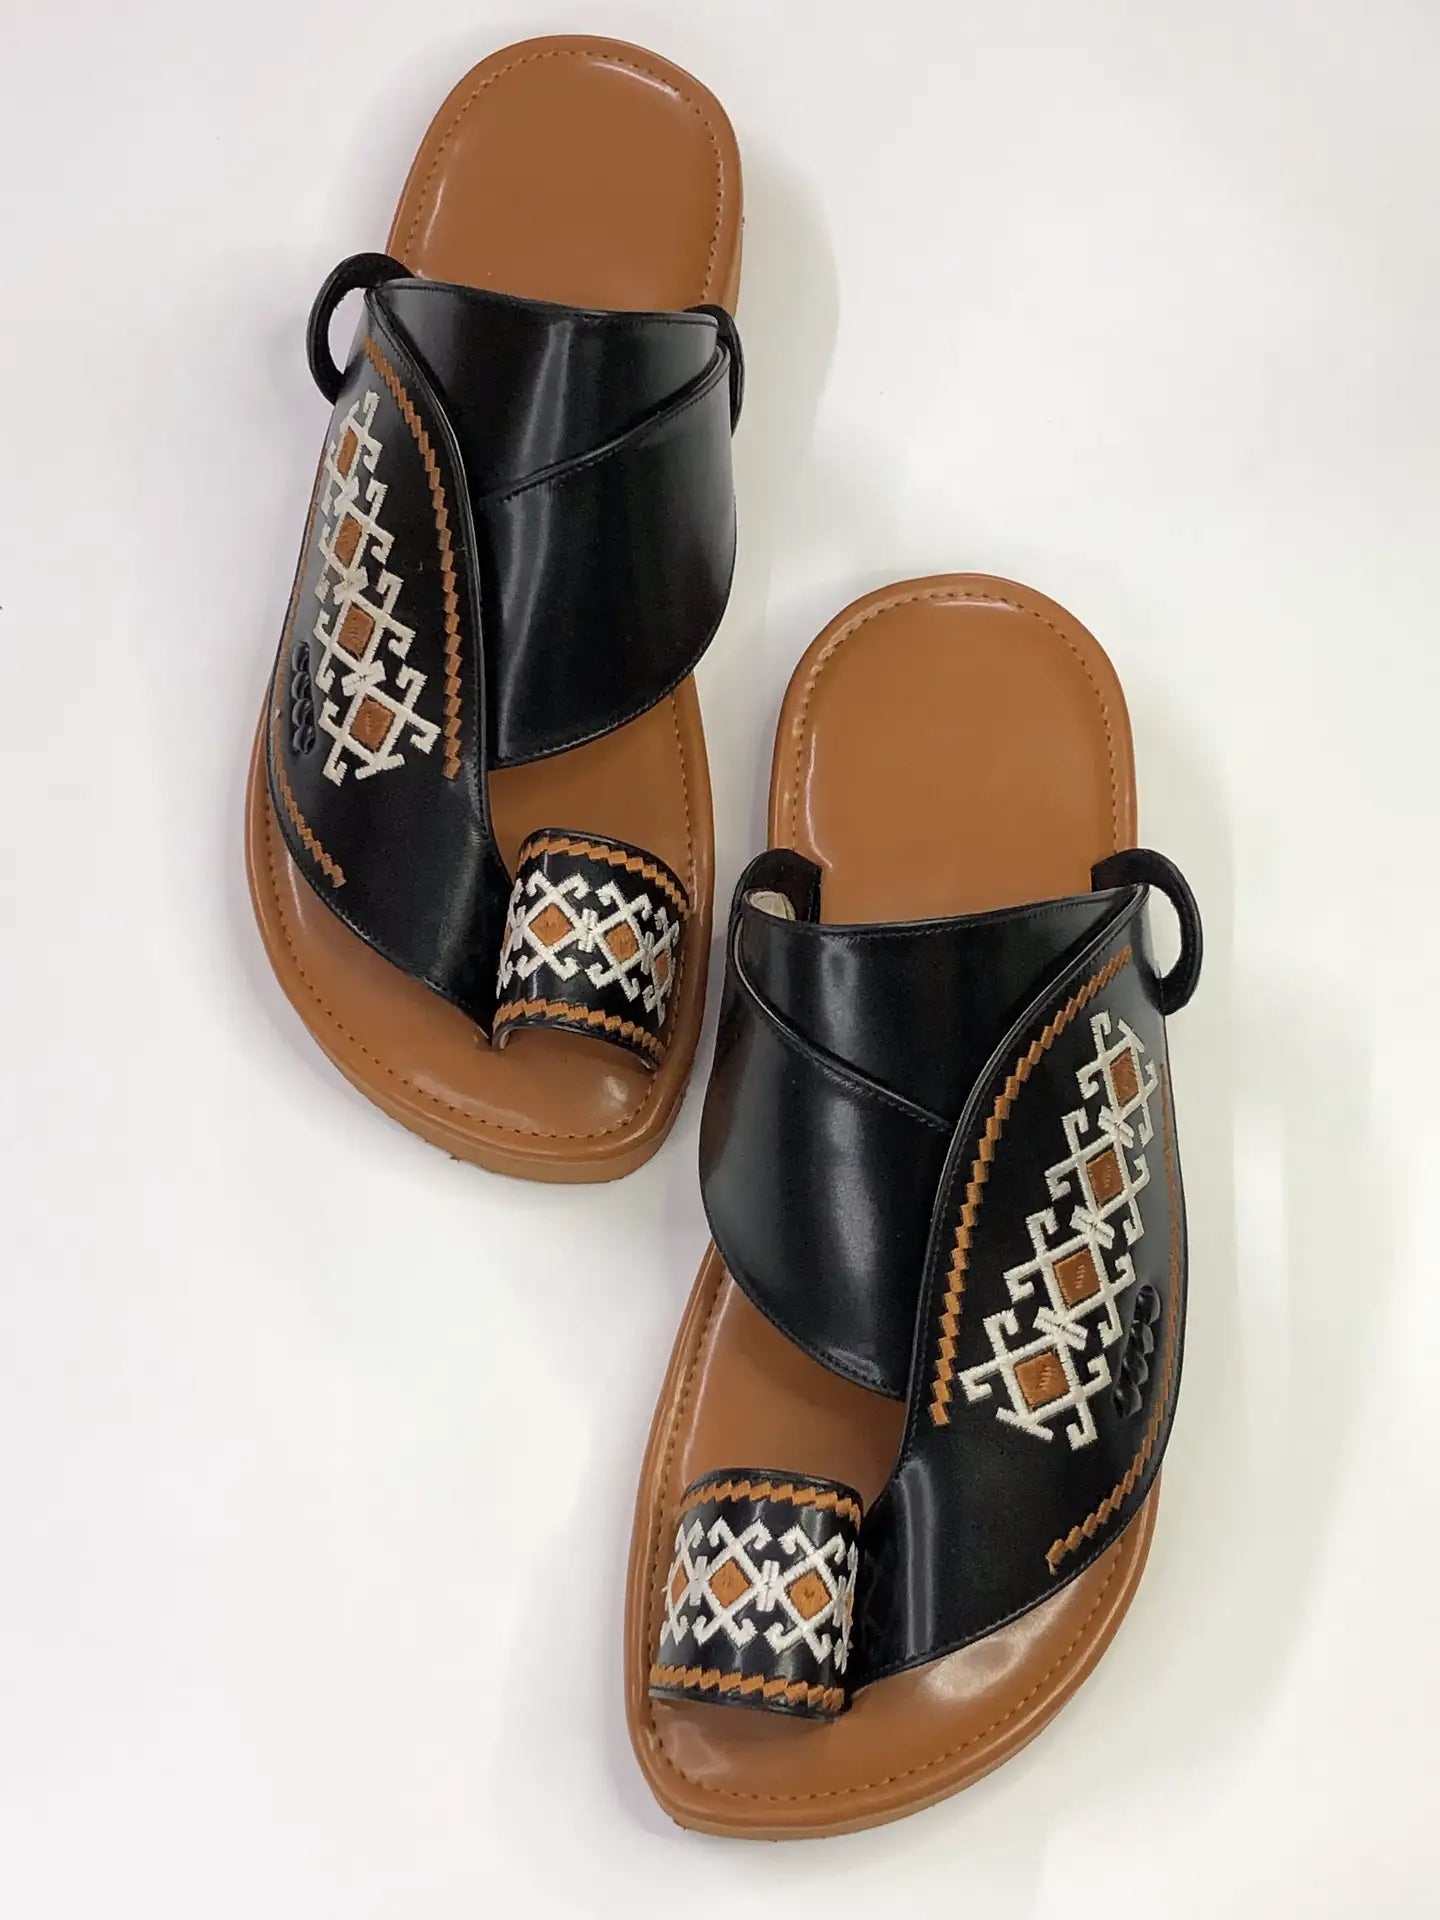 Arabic Khaliji Sandals in Brown Colour with iconic Embroidery